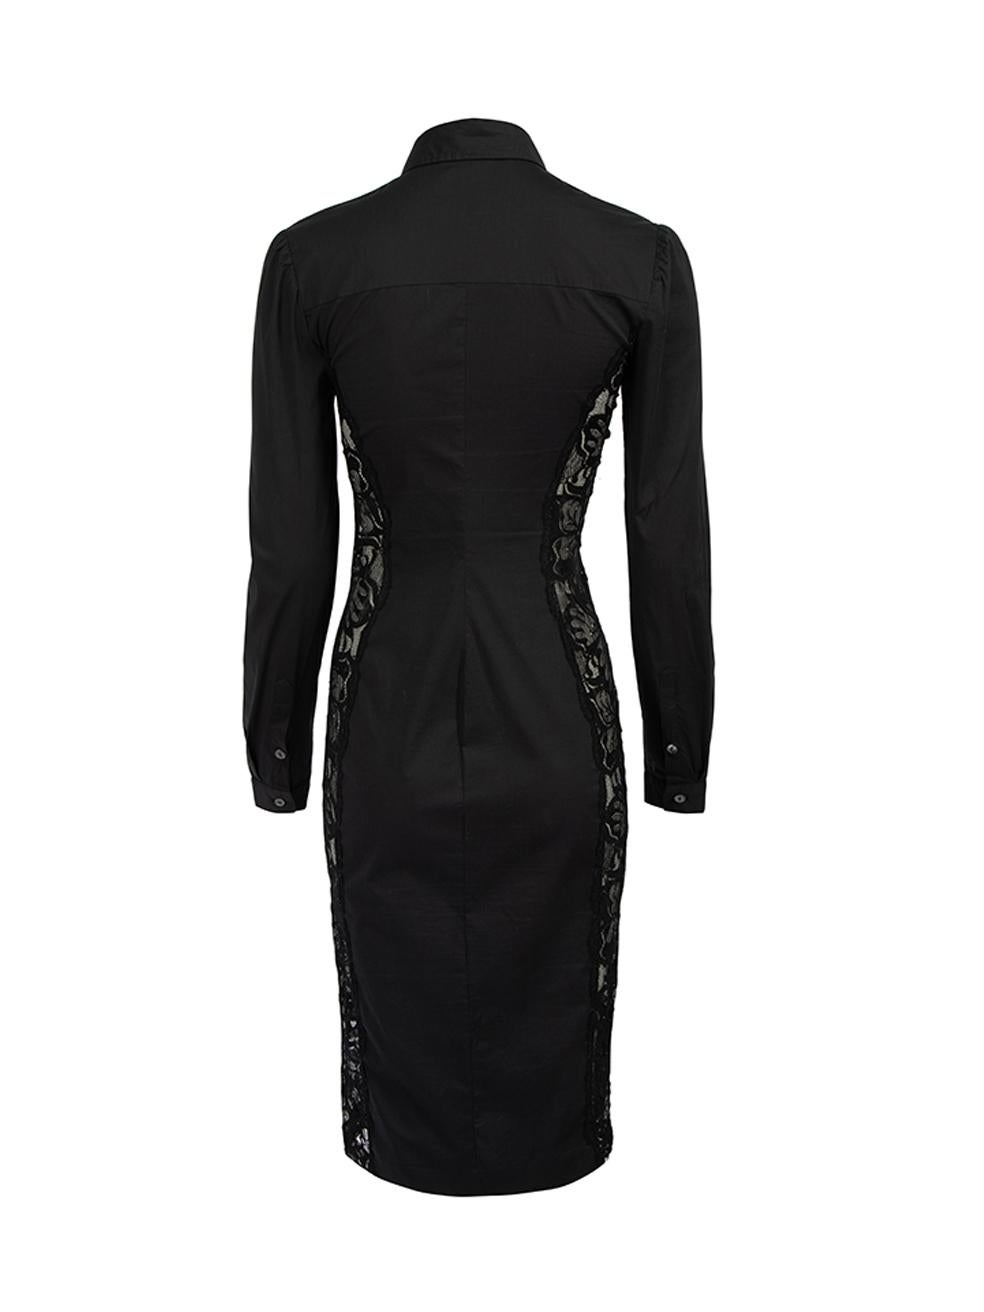 Pre-Loved Dolce & Gabbana Women's Black Lace Panel Button Down Dress In Excellent Condition In London, GB